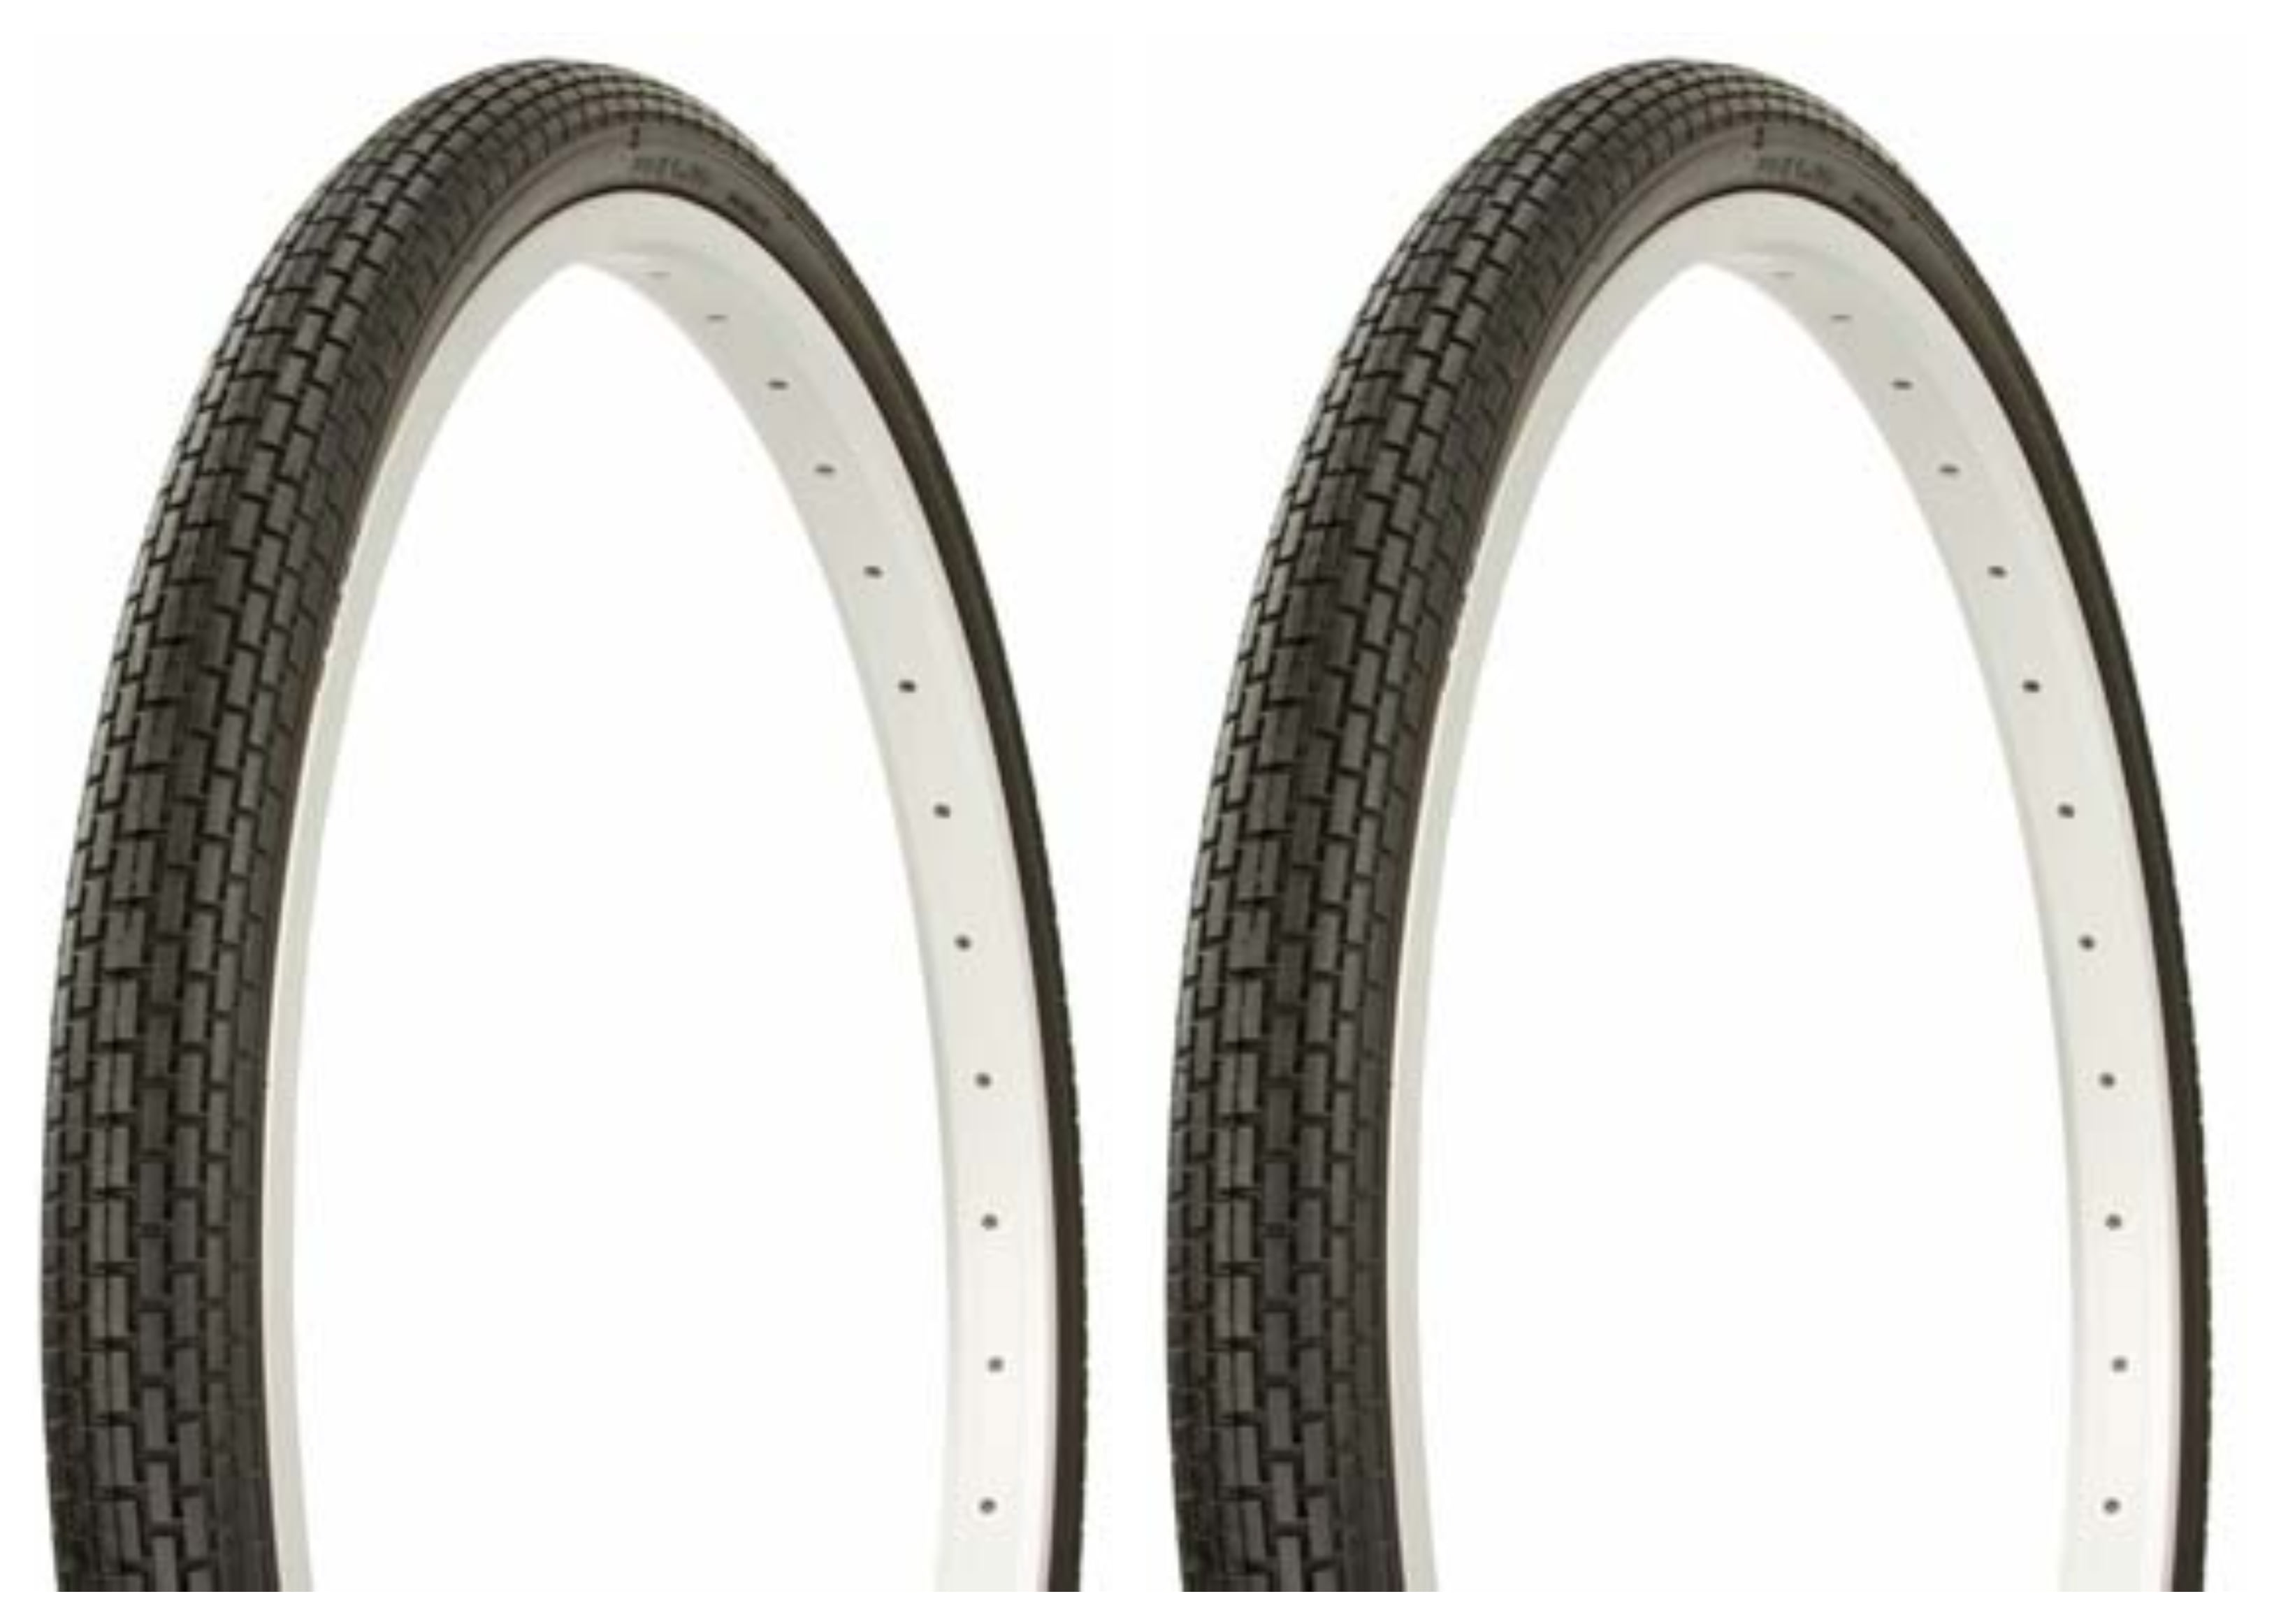 NEW ORIGINAL BICYCLE DURO TIRE IN 20 X 1.75 BLACK/BLACK SIDE WALL 120A. 